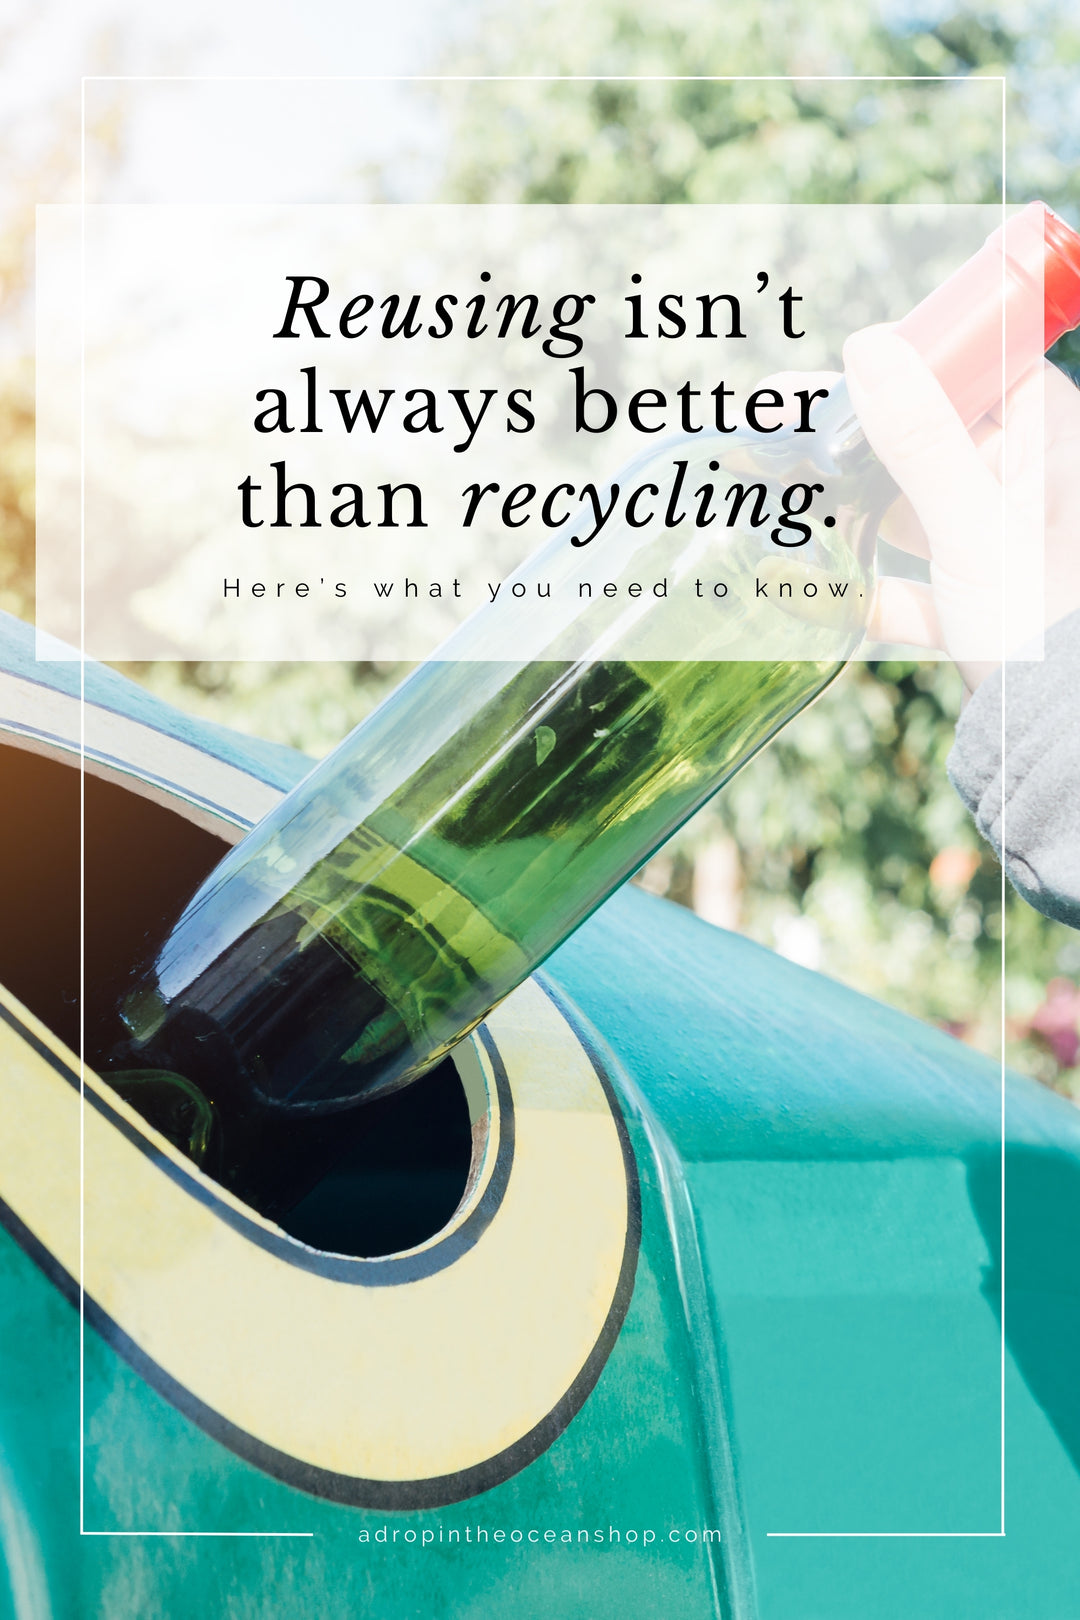 A Drop in the Ocean Zero Waste Store: Why Reusing Isn't Always Better Than Recycling